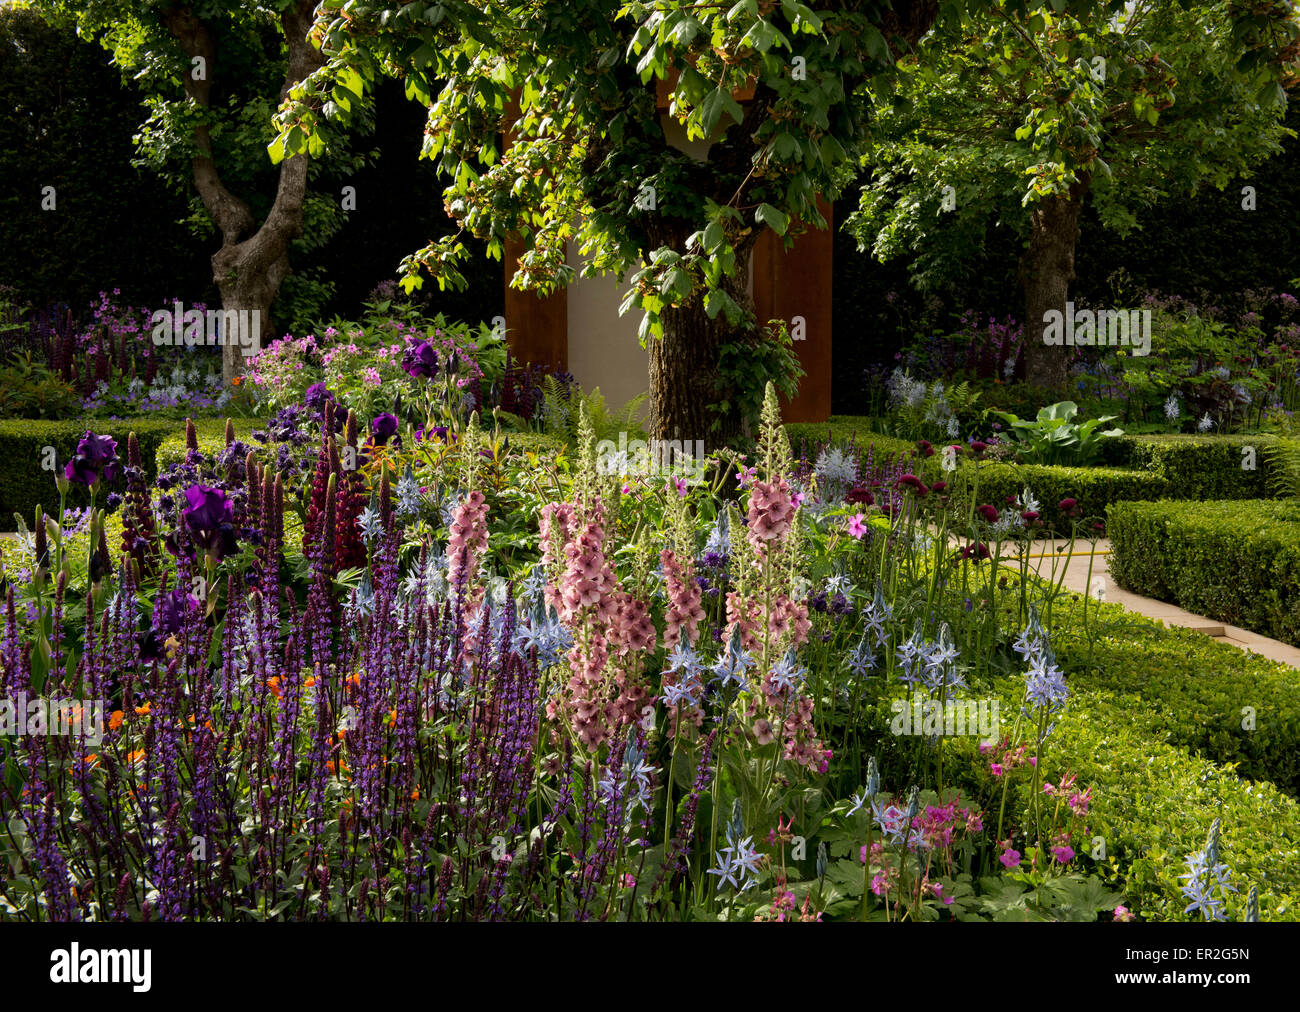 The Morgan Stanley Healthy Cities Garden designed by Chris Beardshaw and winner of a gold medal at The Chelsea Flower Show 2015 Stock Photo